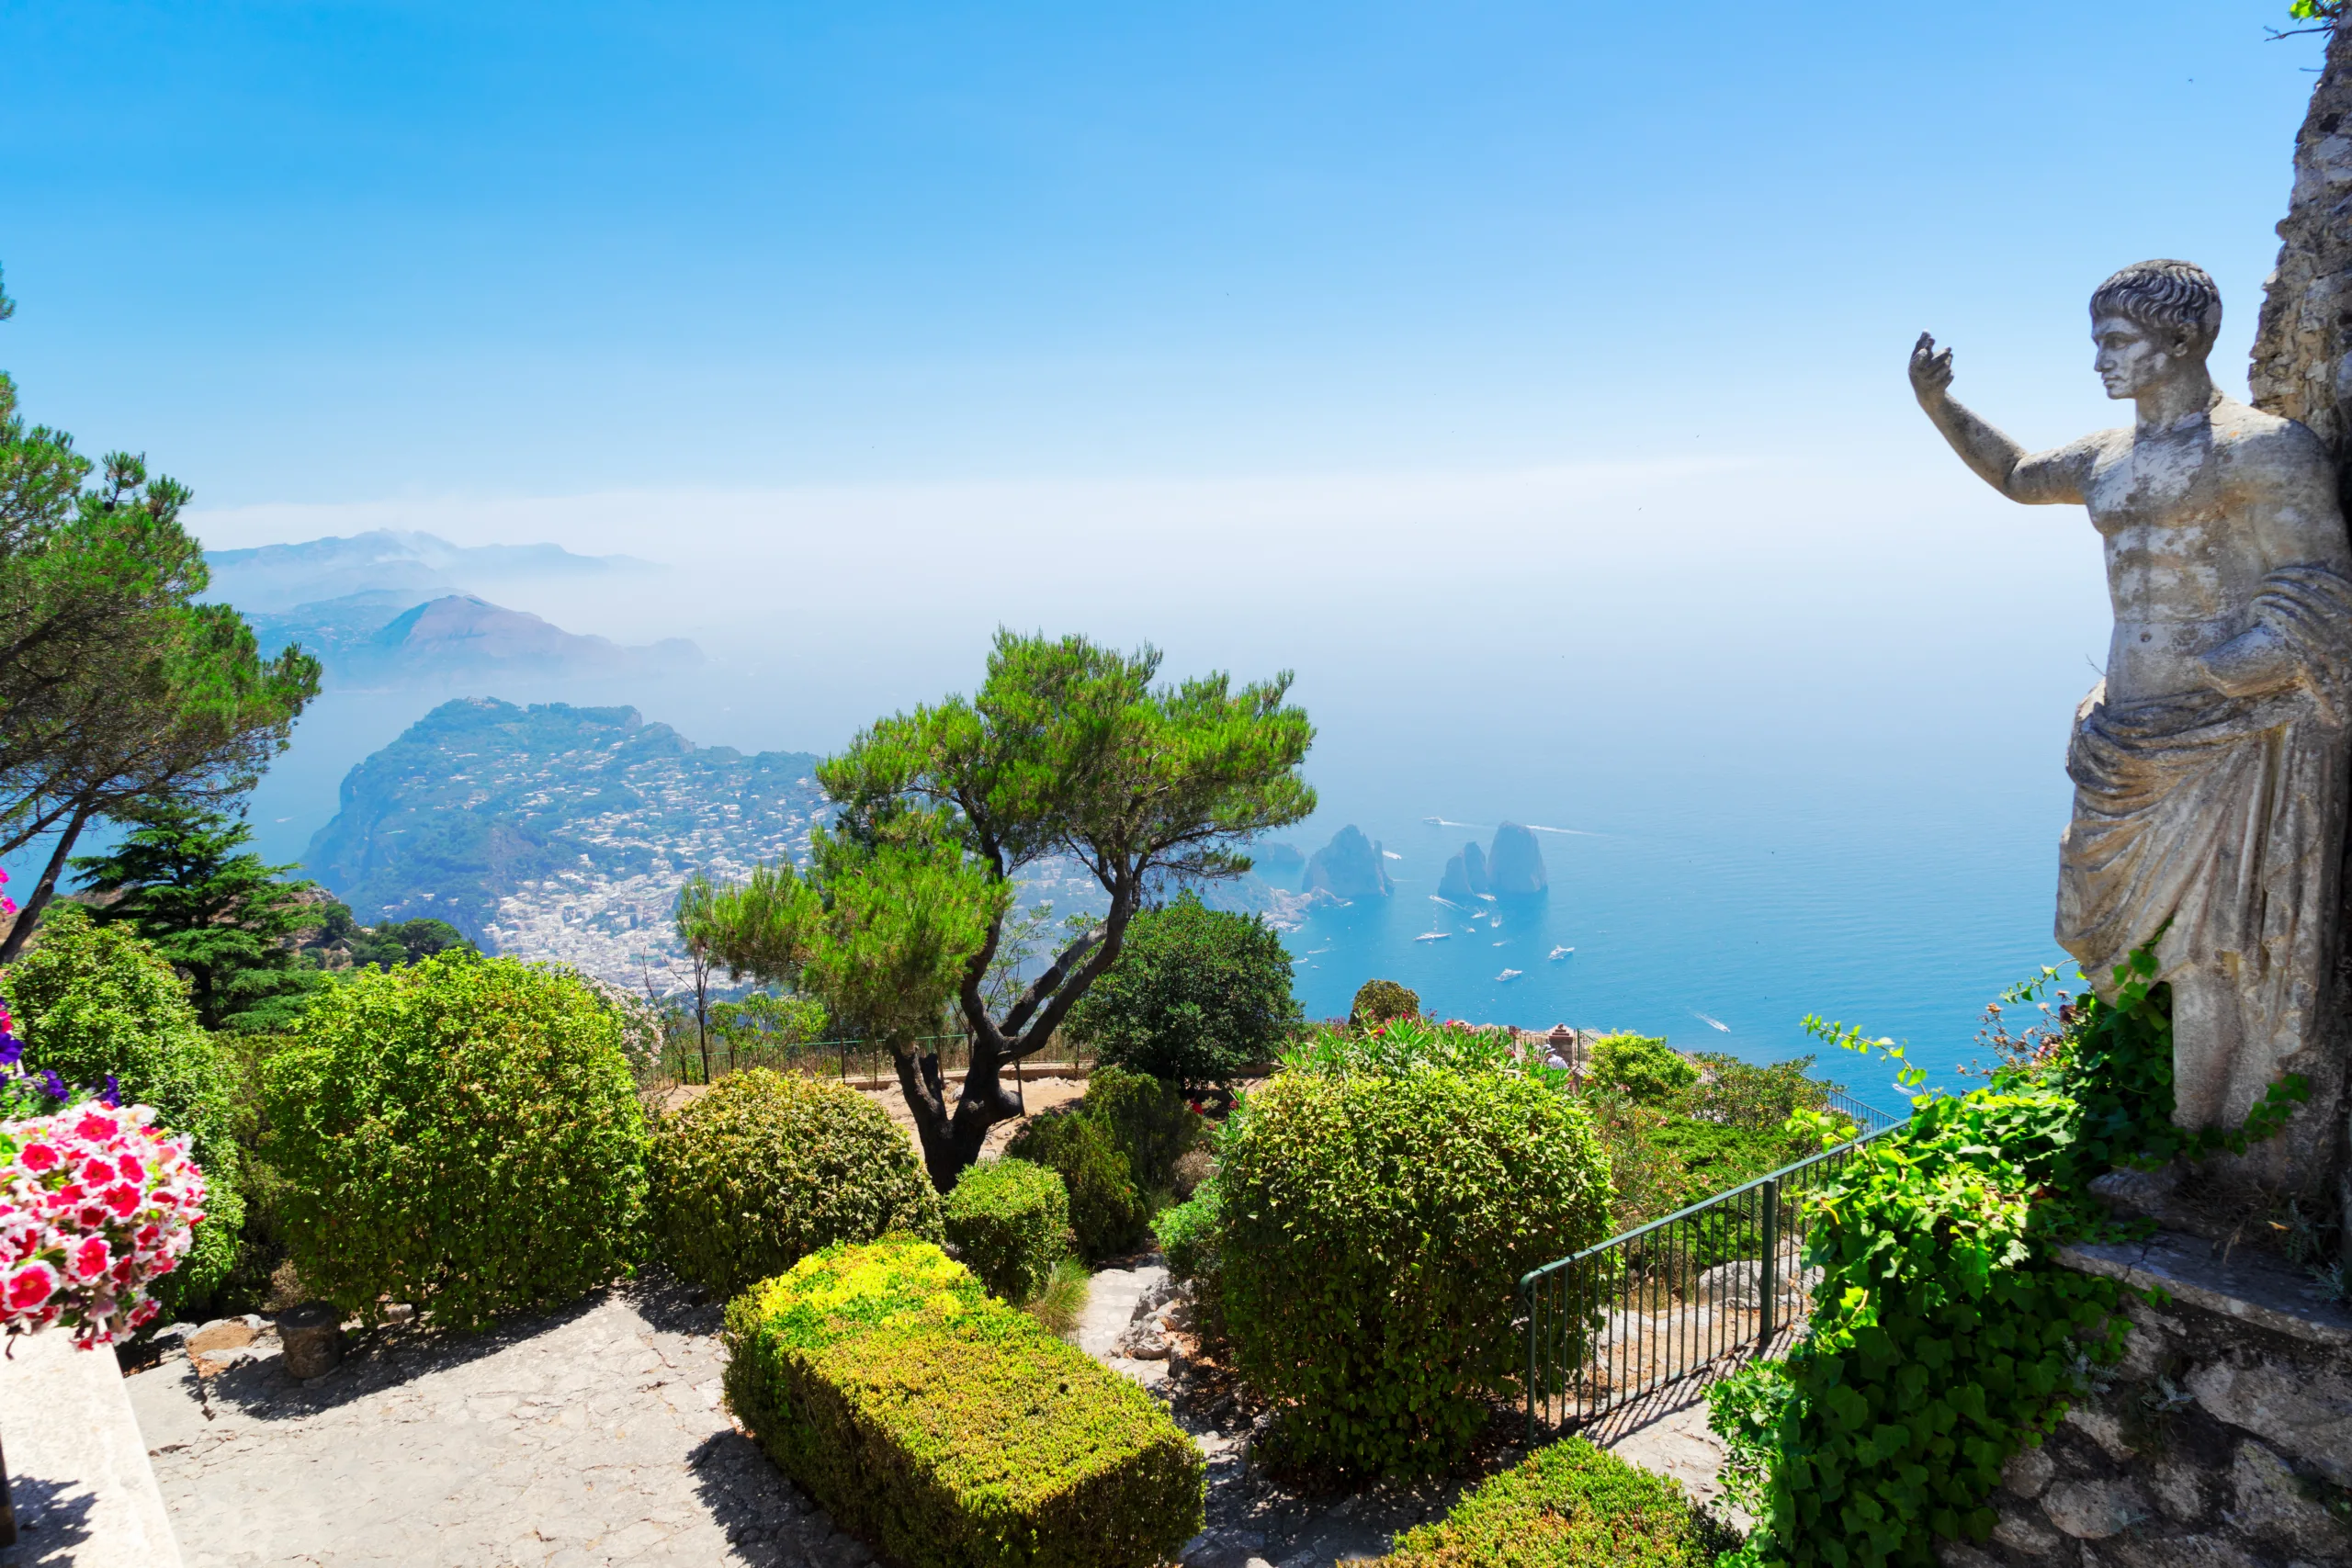 View of the sea and garden from Anacapri plateau